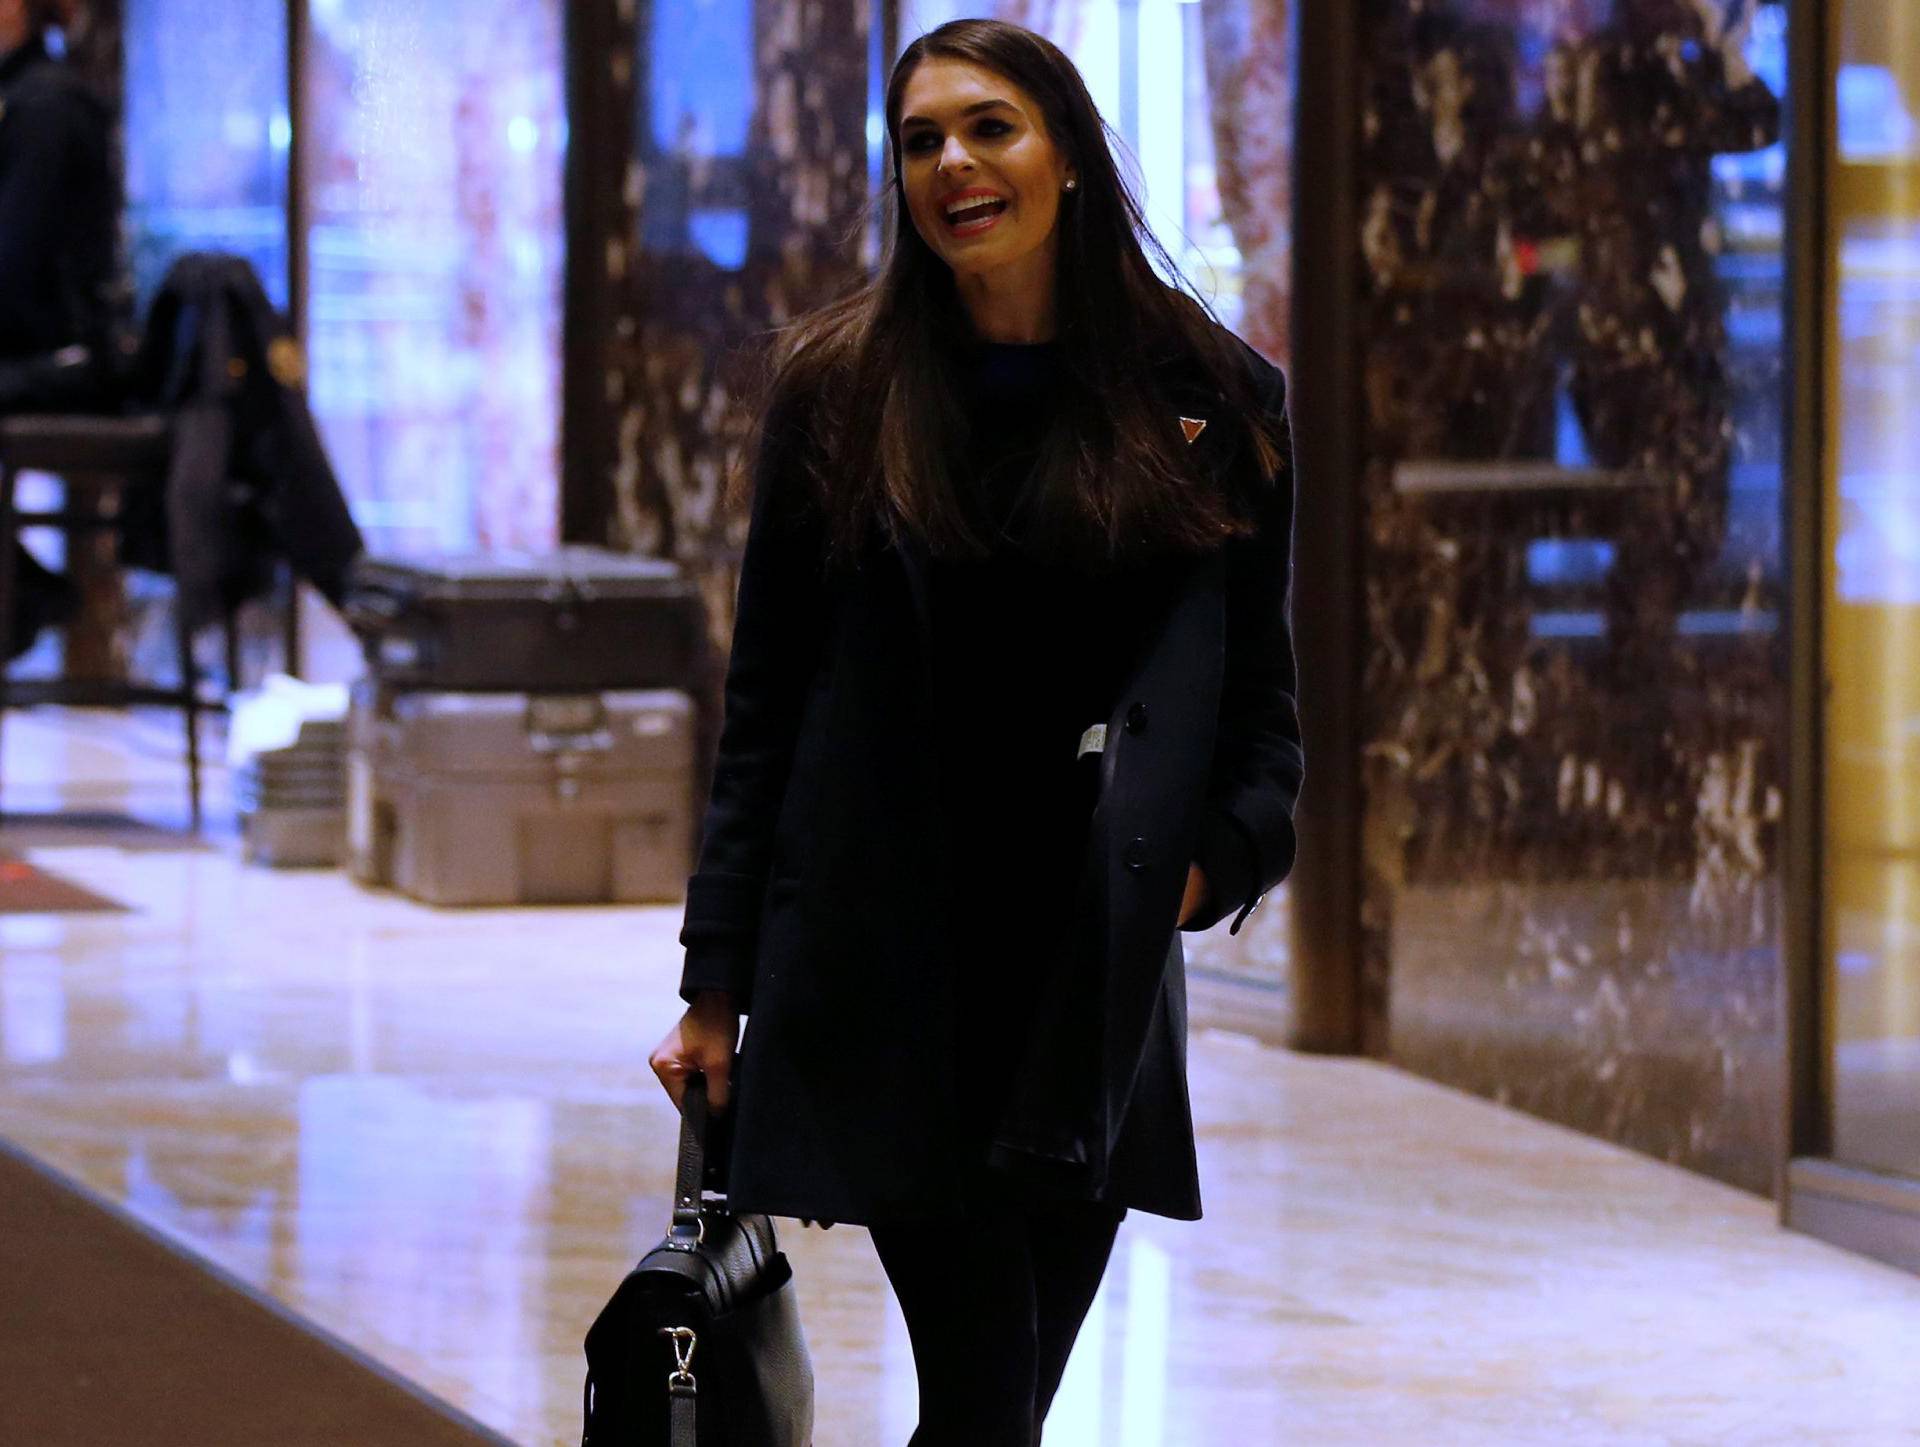 Hicks, spokeswoman for U.S. President-elect Donald Trump, arrives at Trump Tower in New York